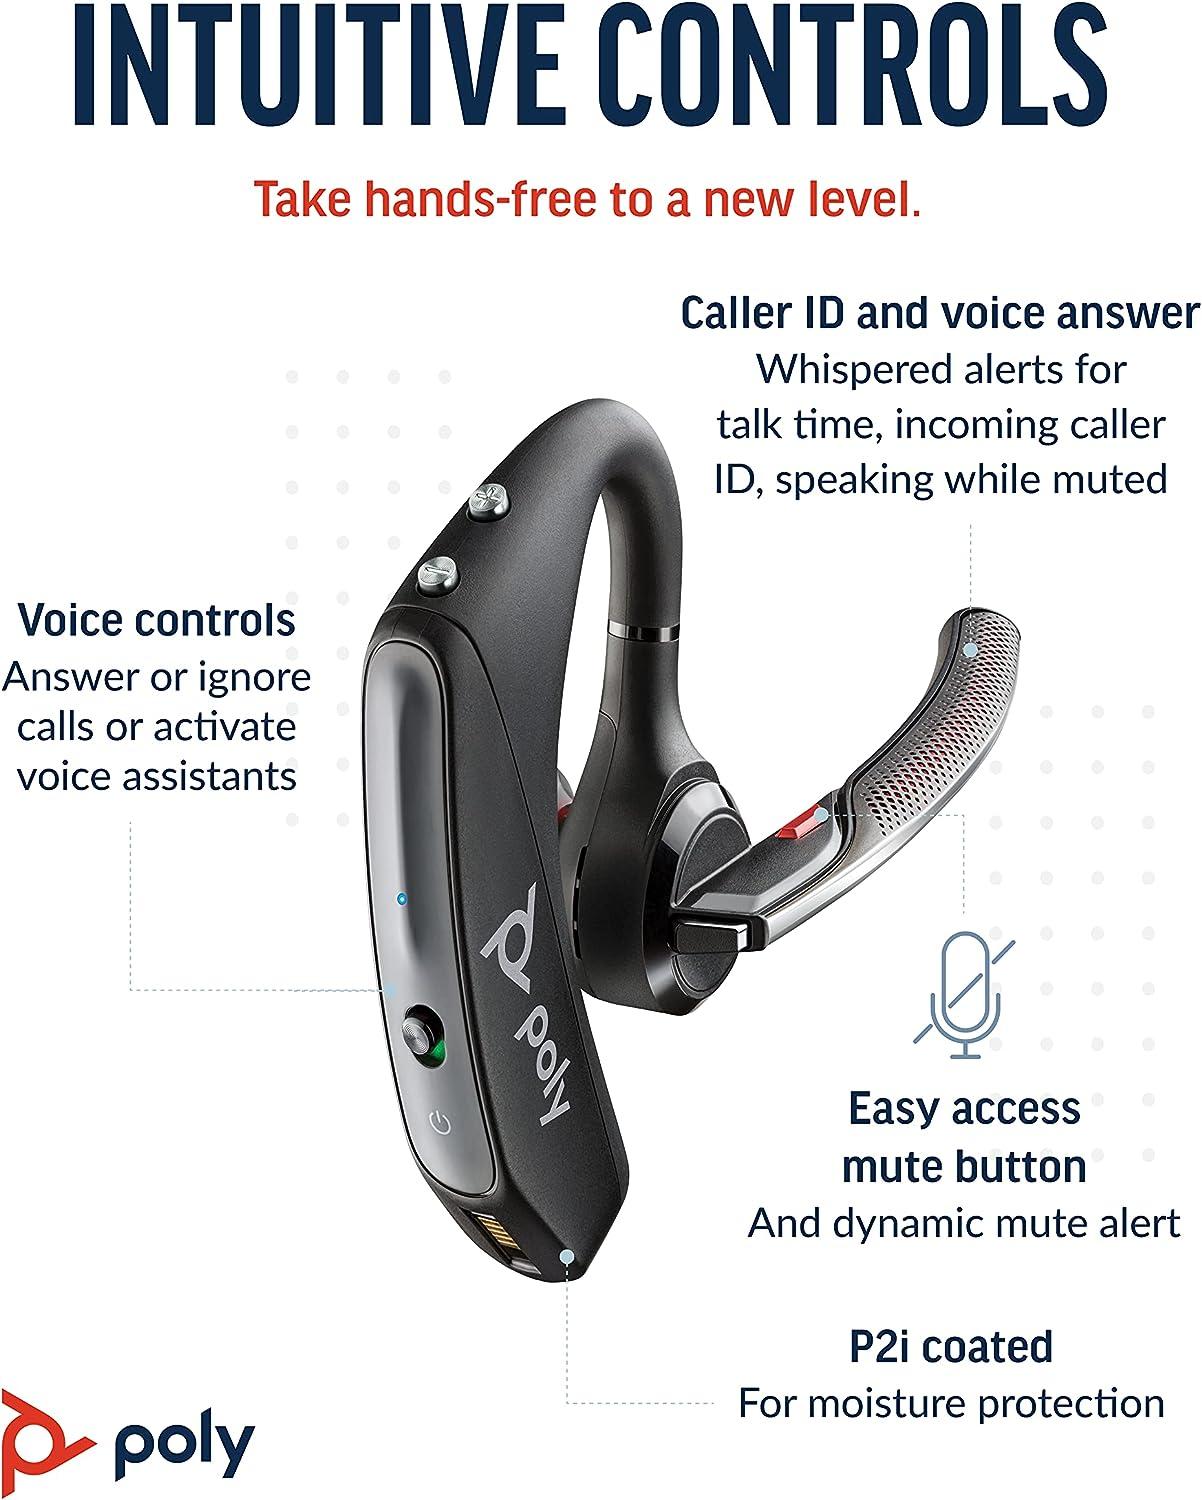 Poly Voyager 5200 Wireless Design Bluetooth to Ergonomic Voice - Headset via Lightweight Mic - Mobile/Tablet - Headset (Plantronics) Bluetooth Controls w/Noise-Canceling - Connect Single-Ear 